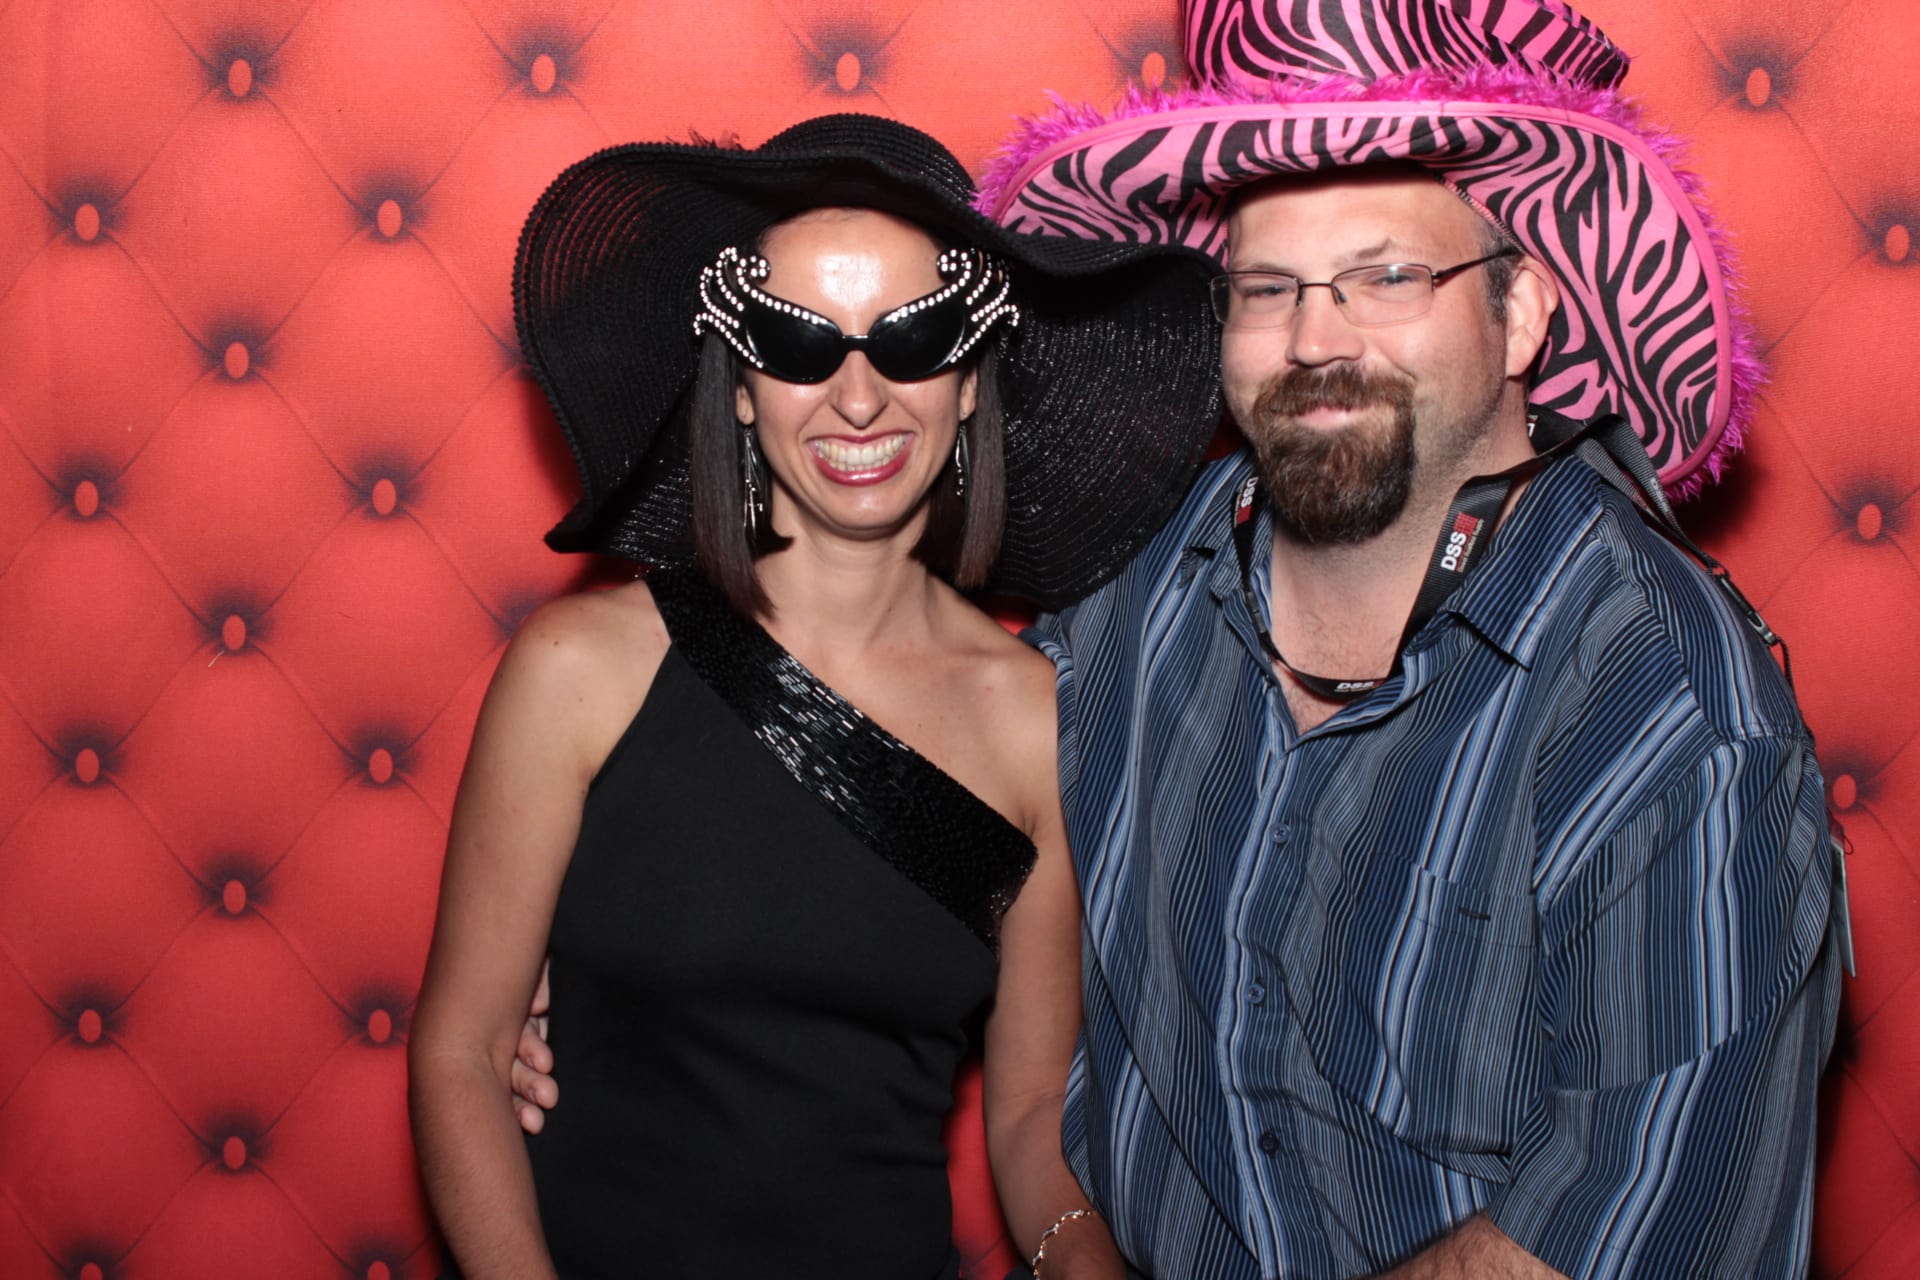 Photo-Booth-Rental-Corporate-Austin-Social-Media-LGBT-Hilton-Affordable-No.1-Fun-Best-Props-